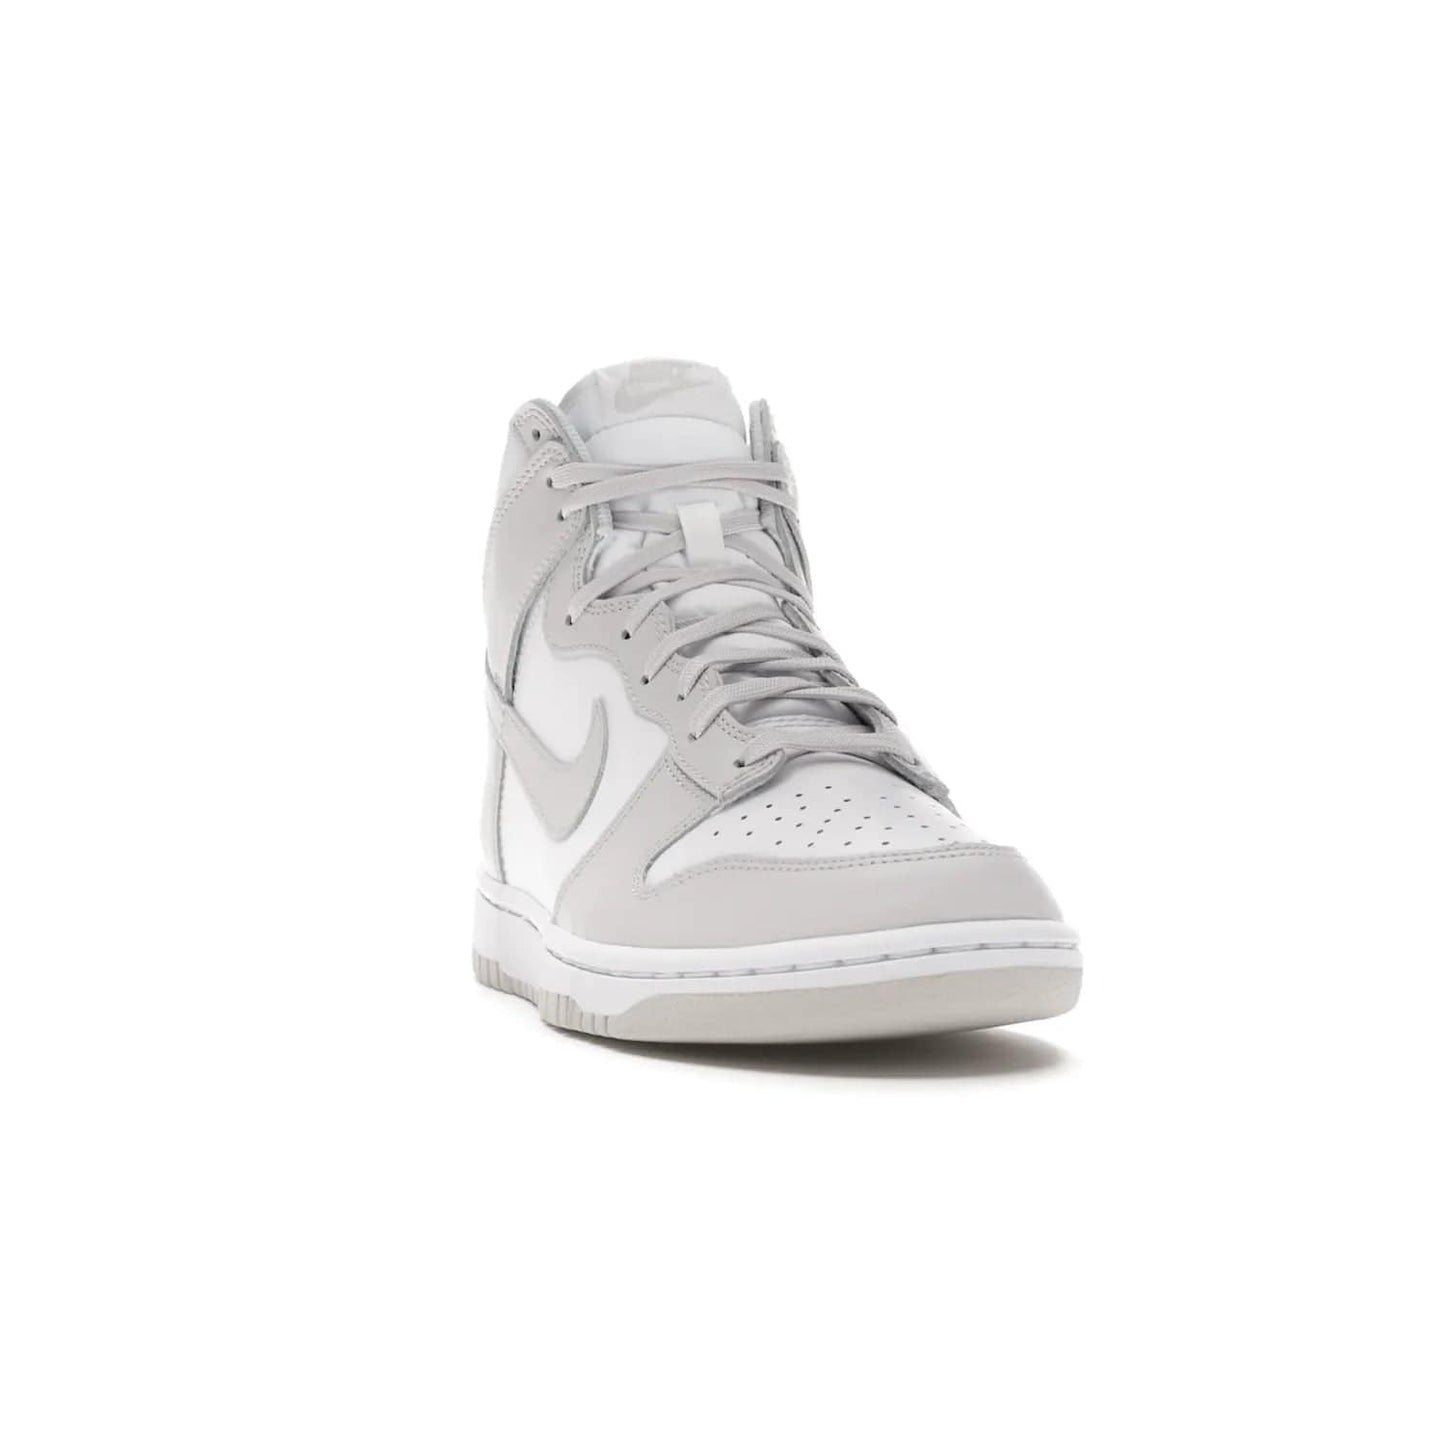 Nike Dunk High Retro White Vast Grey (2021) - Image 8 - Only at www.BallersClubKickz.com - Nike Dunk High Retro White Vast Grey 2021: classic '80s basketball sneaker with a crisp white base, grey overlays, midsole tooling and outsole. Dropped Feb. 2021.